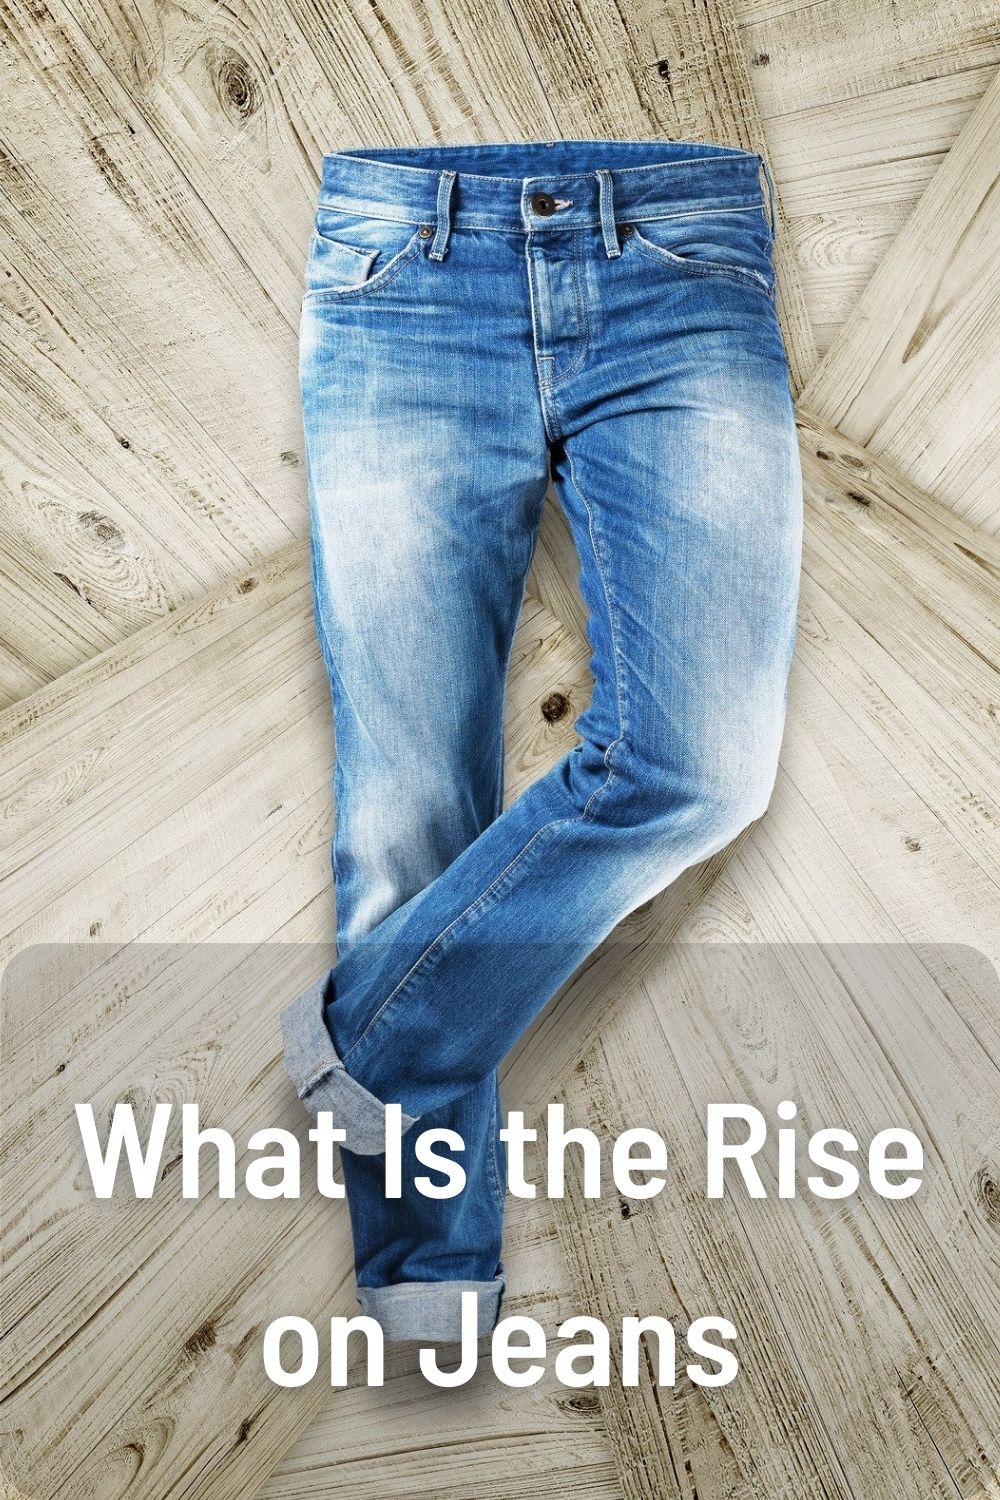 What Is the Rise on Jeans